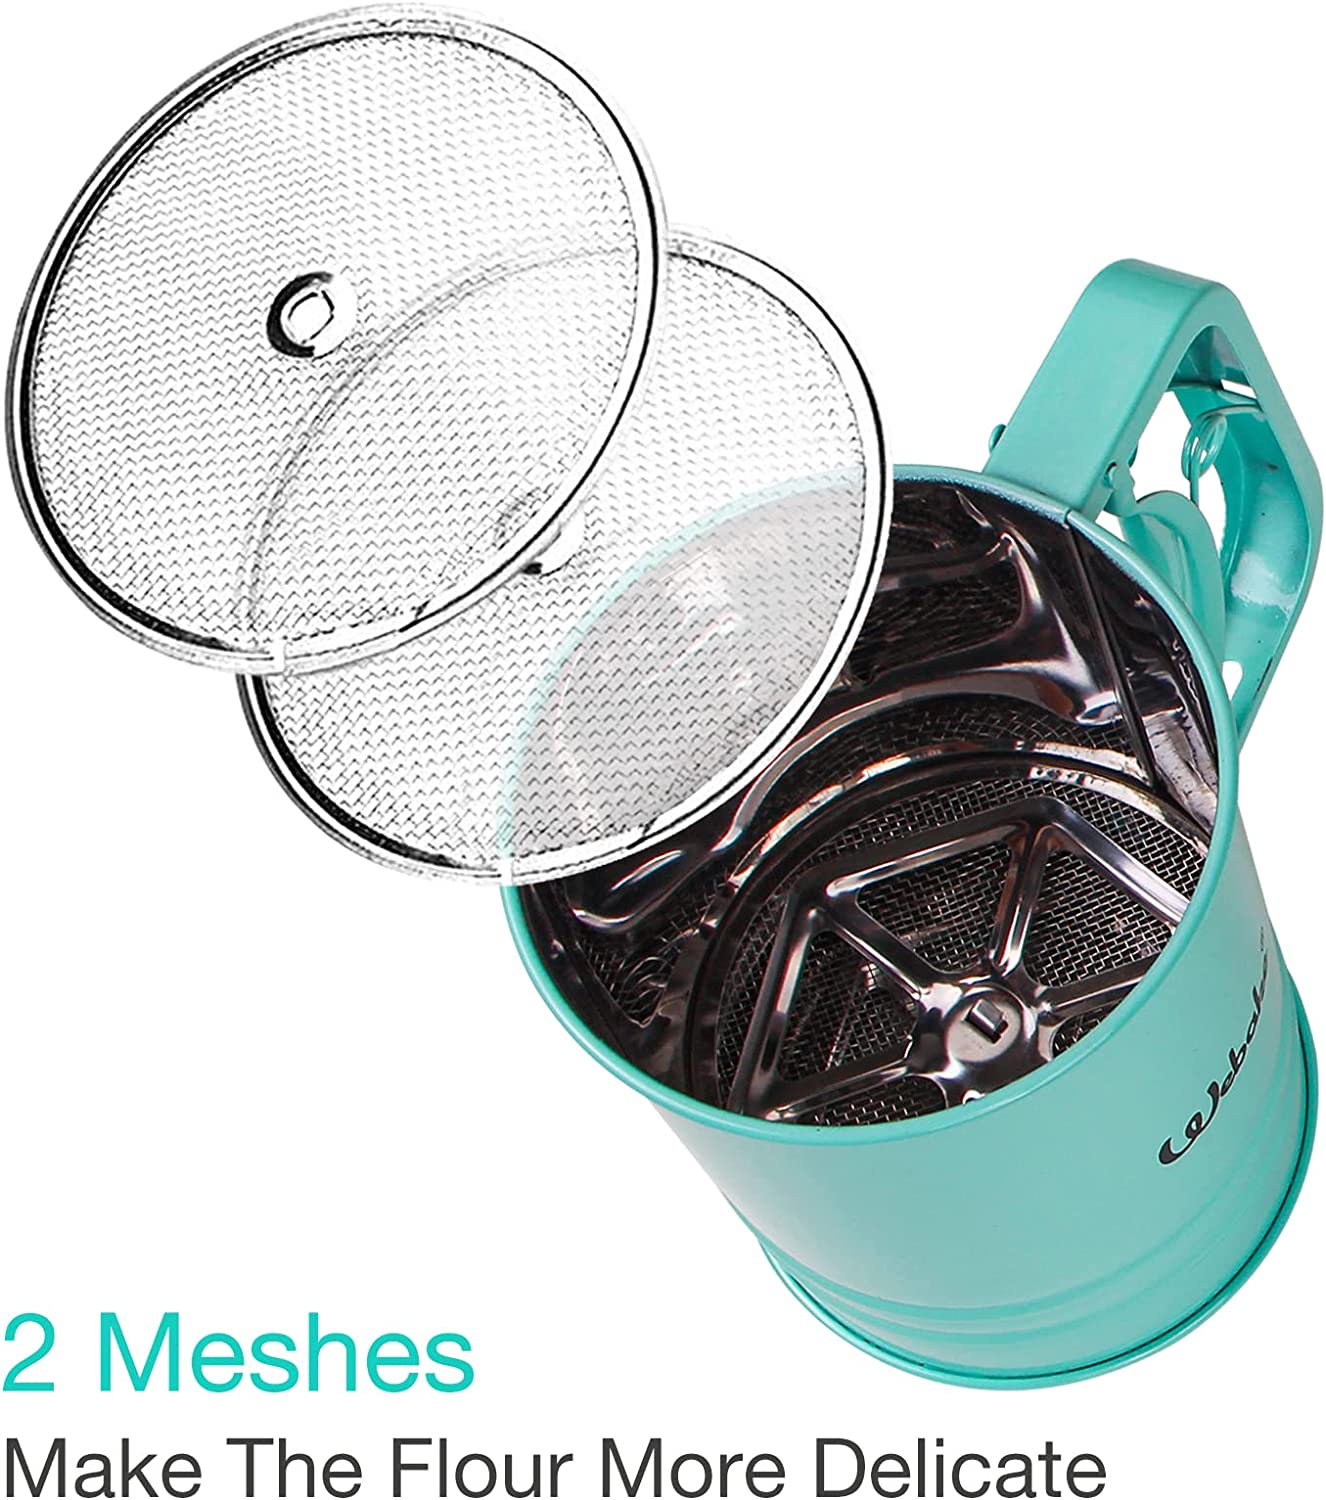 Webake Stainless Steel One-handed Small small Flour Sieve Cocoa Powder Sifter (Green)